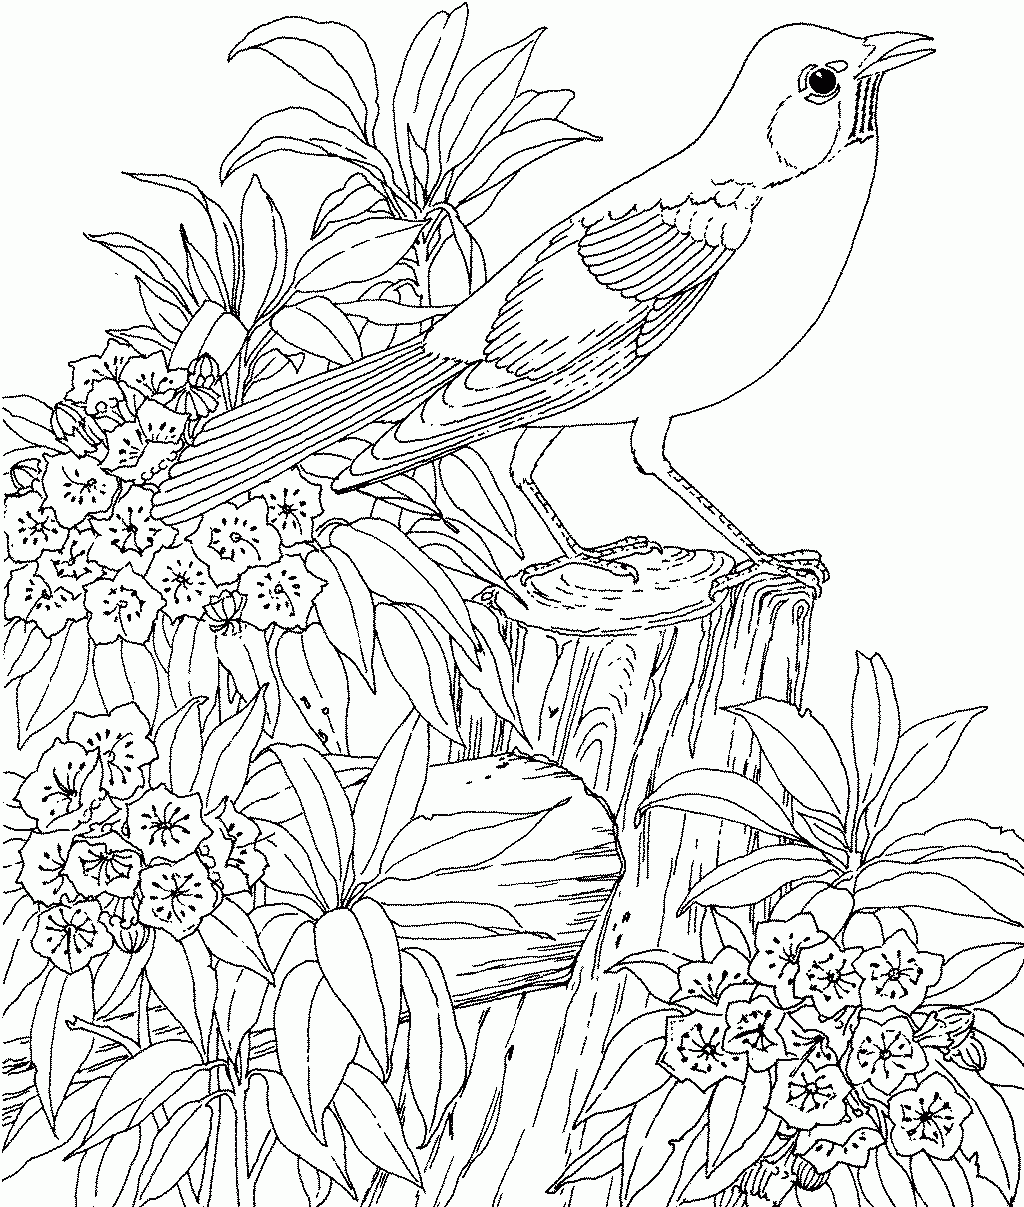 coloring pages of garden flowers flower garden coloring pages to download and print for free pages garden of flowers coloring 